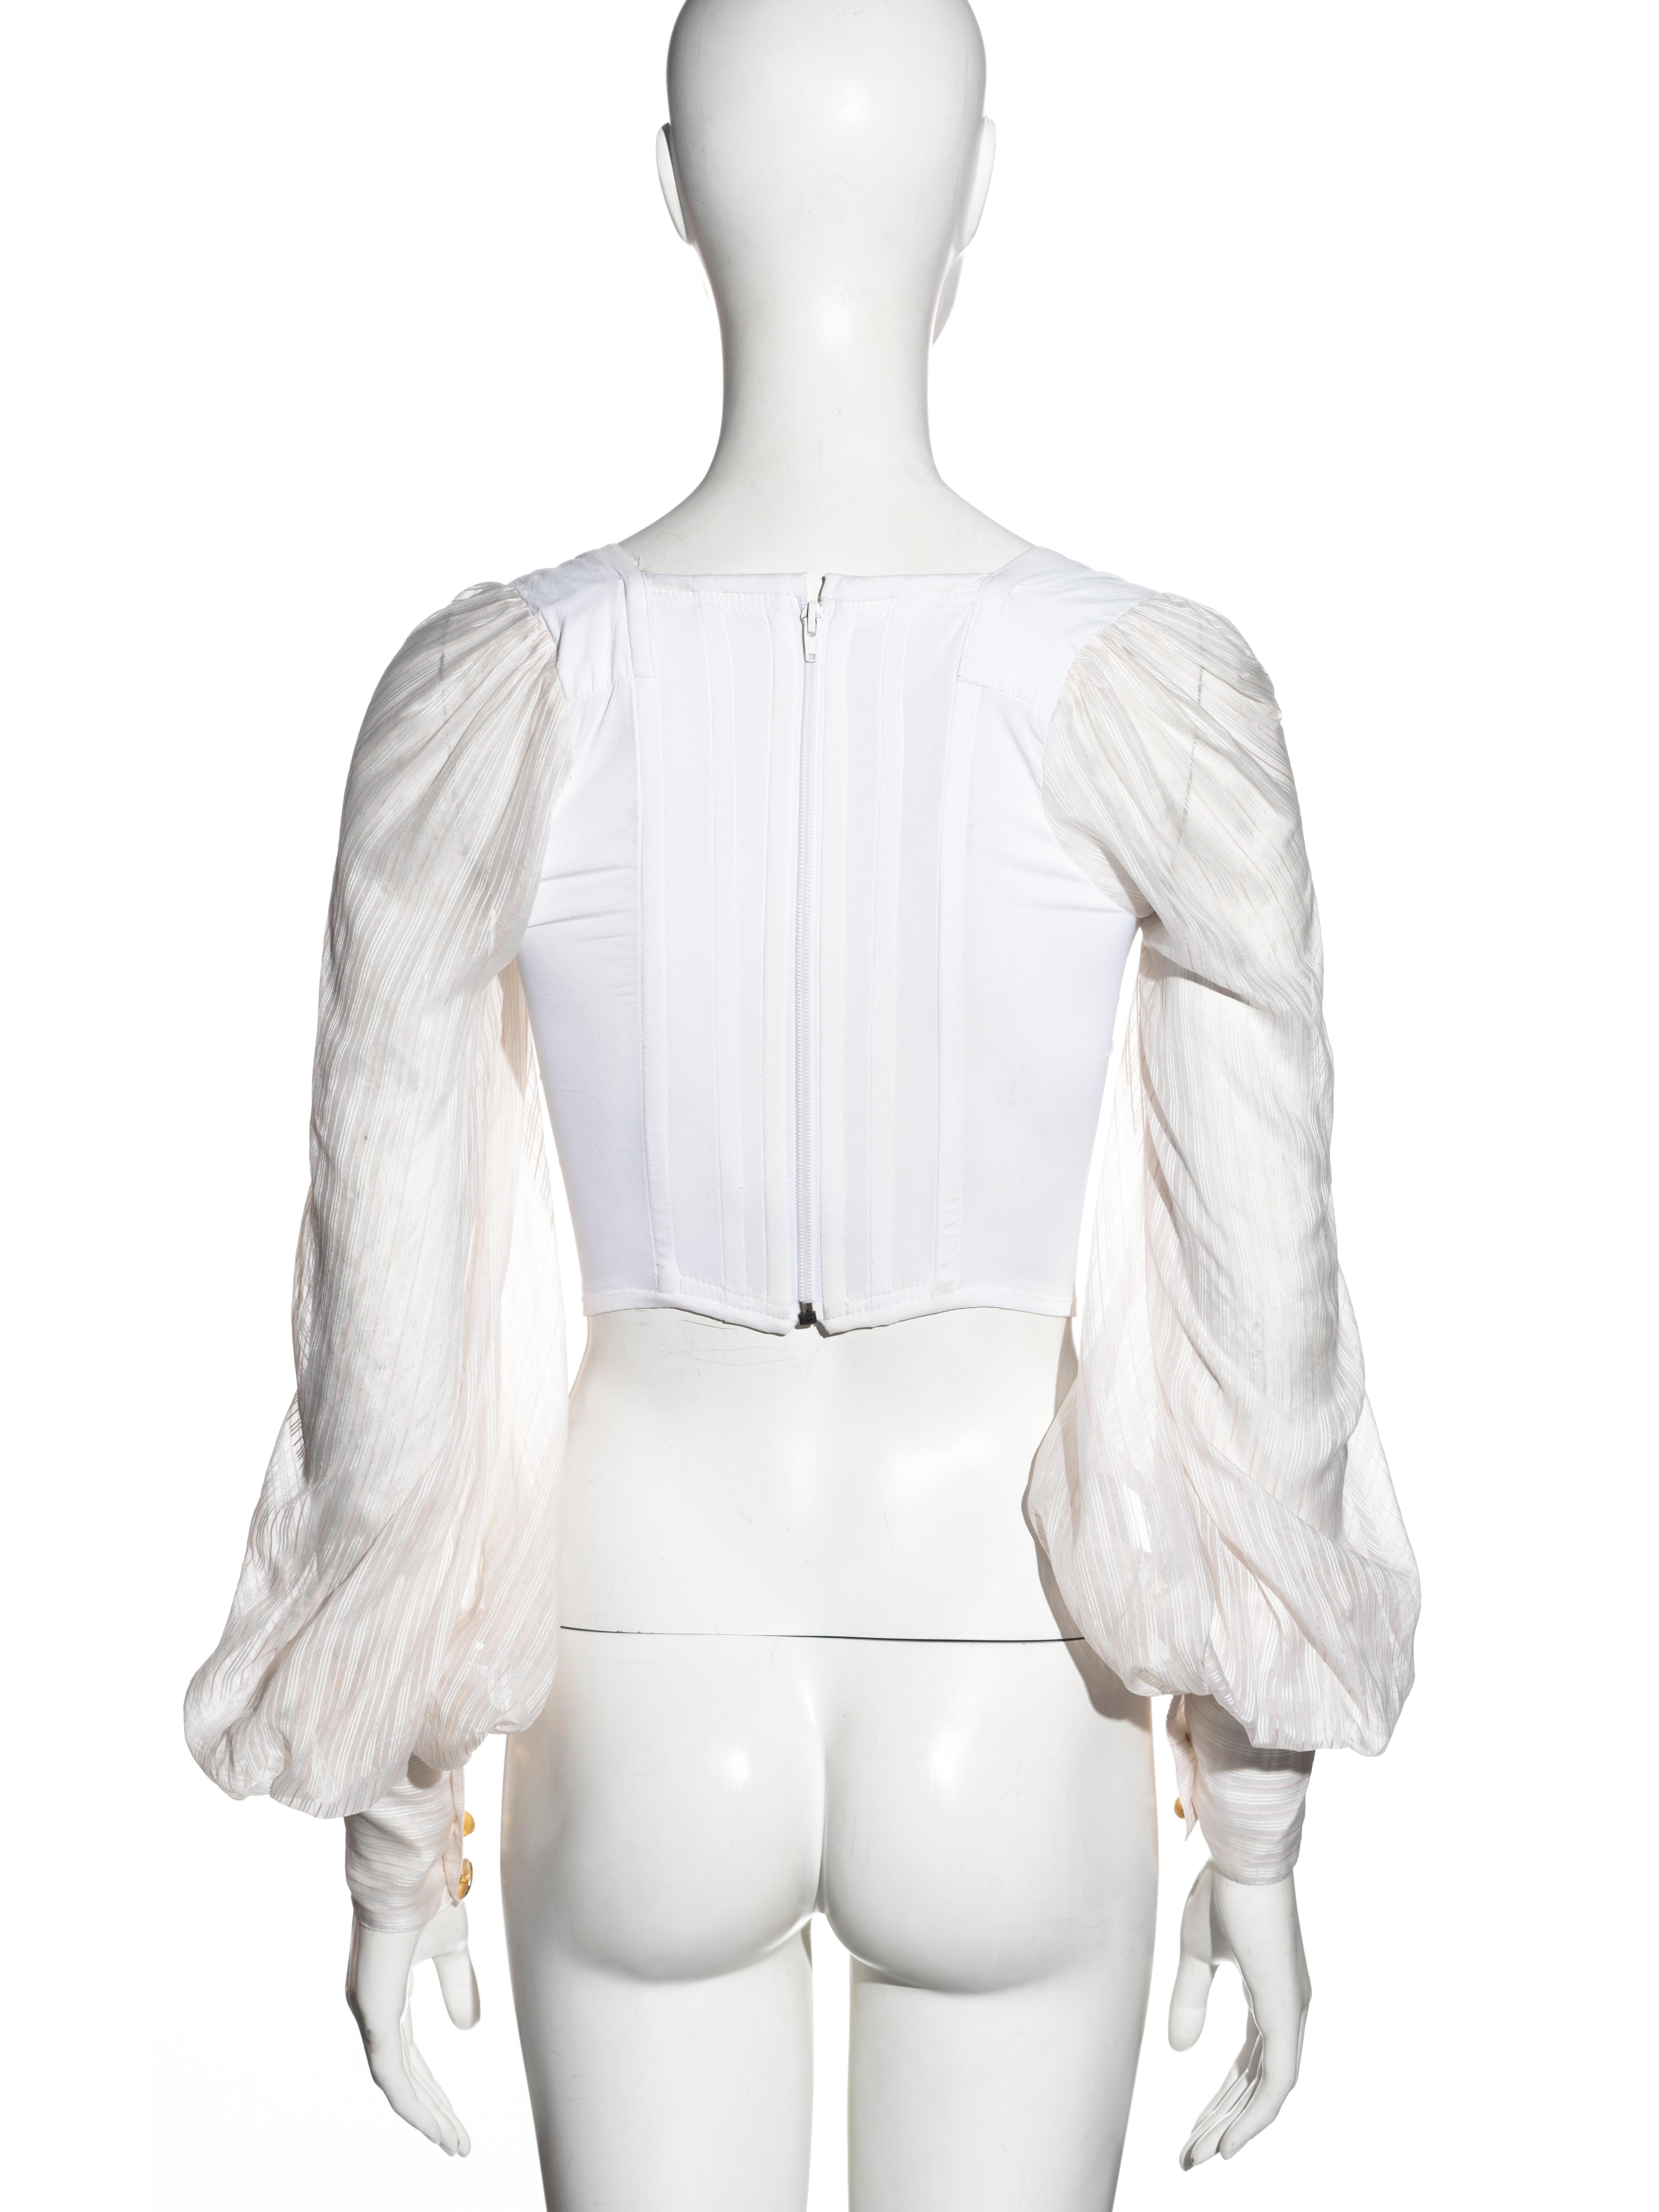 Women's Vivienne Westwood white corset with bishop sleeves, ss 1995